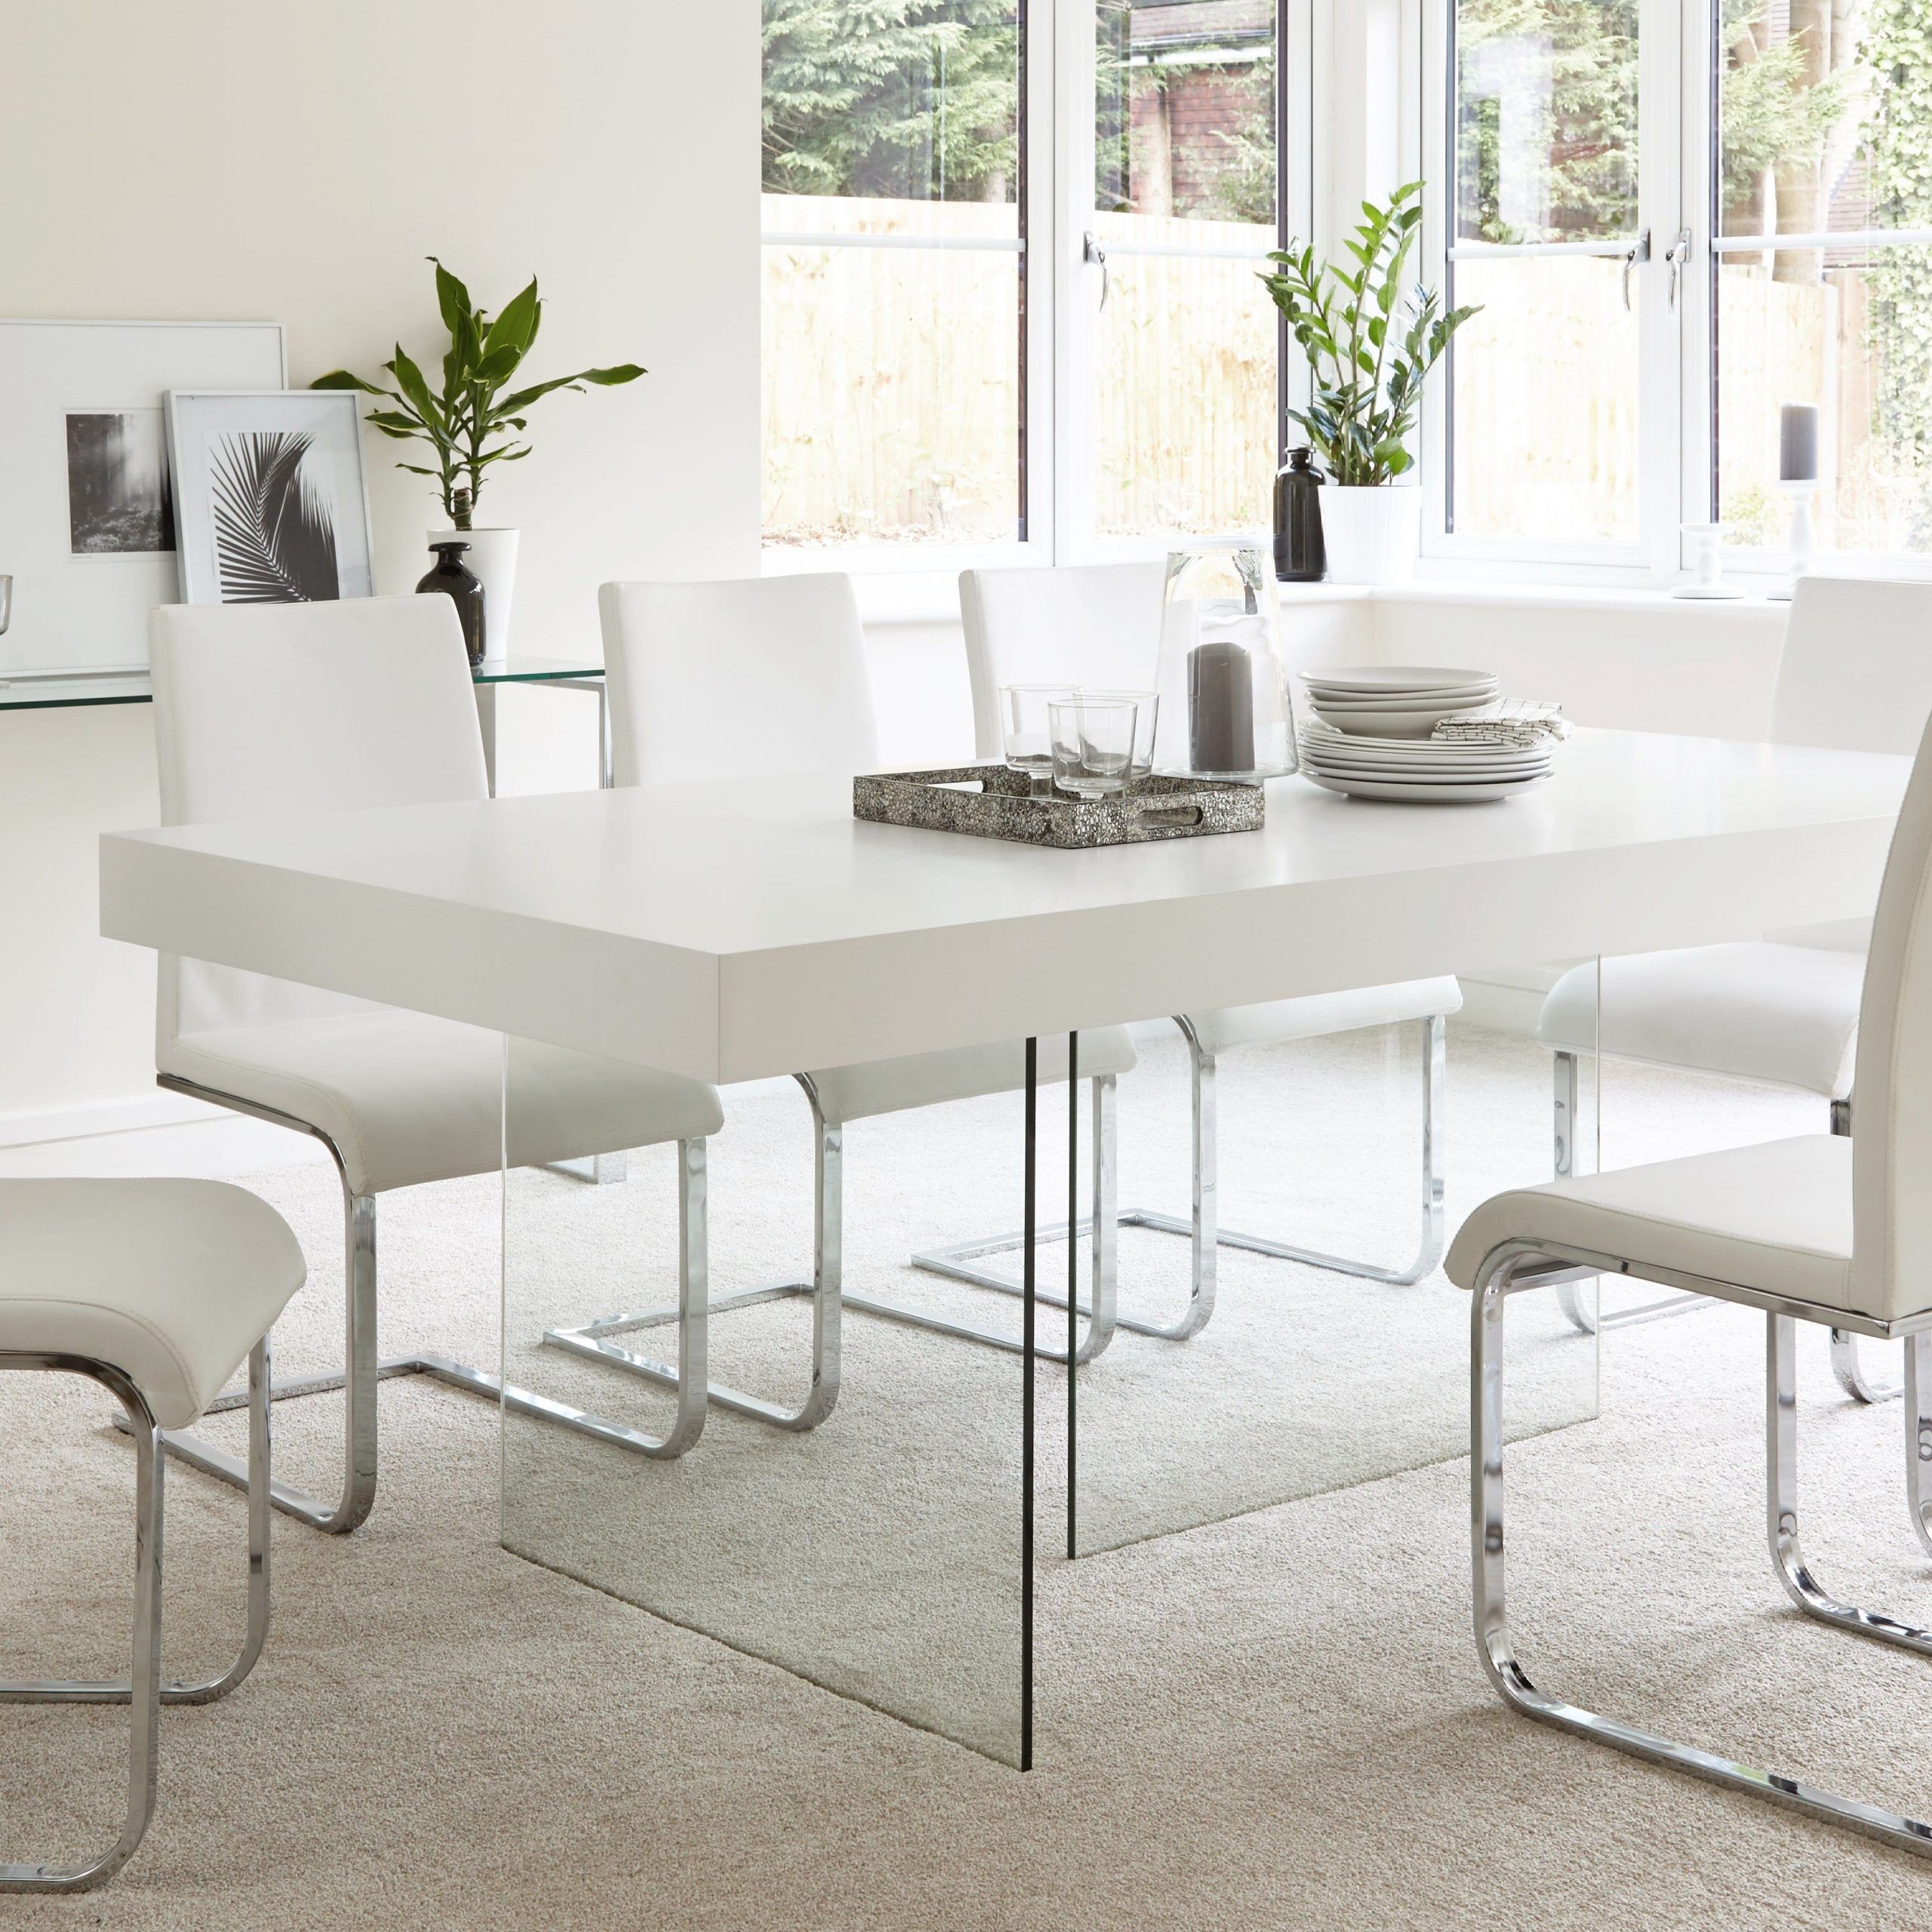 Most Recent Contemporary 4 Seating Oblong Dining Tables Throughout Aria White Oak And Glass Dining Table (View 9 of 30)